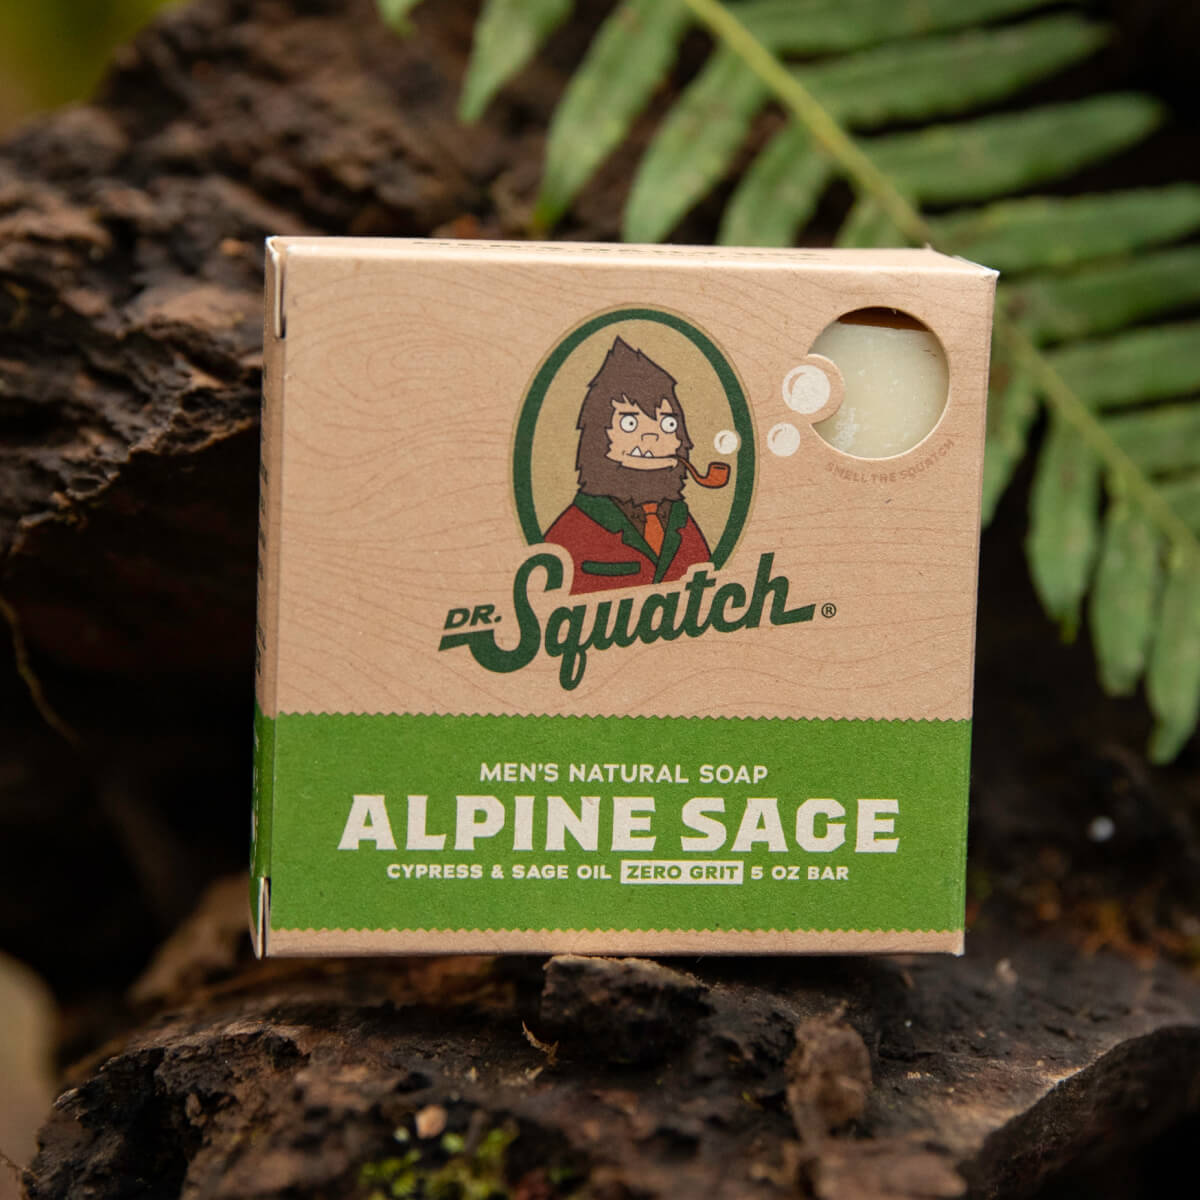 Dr. Squatch Bar Soap, Gold Moss – Blue Claw Co. Bags and Leather